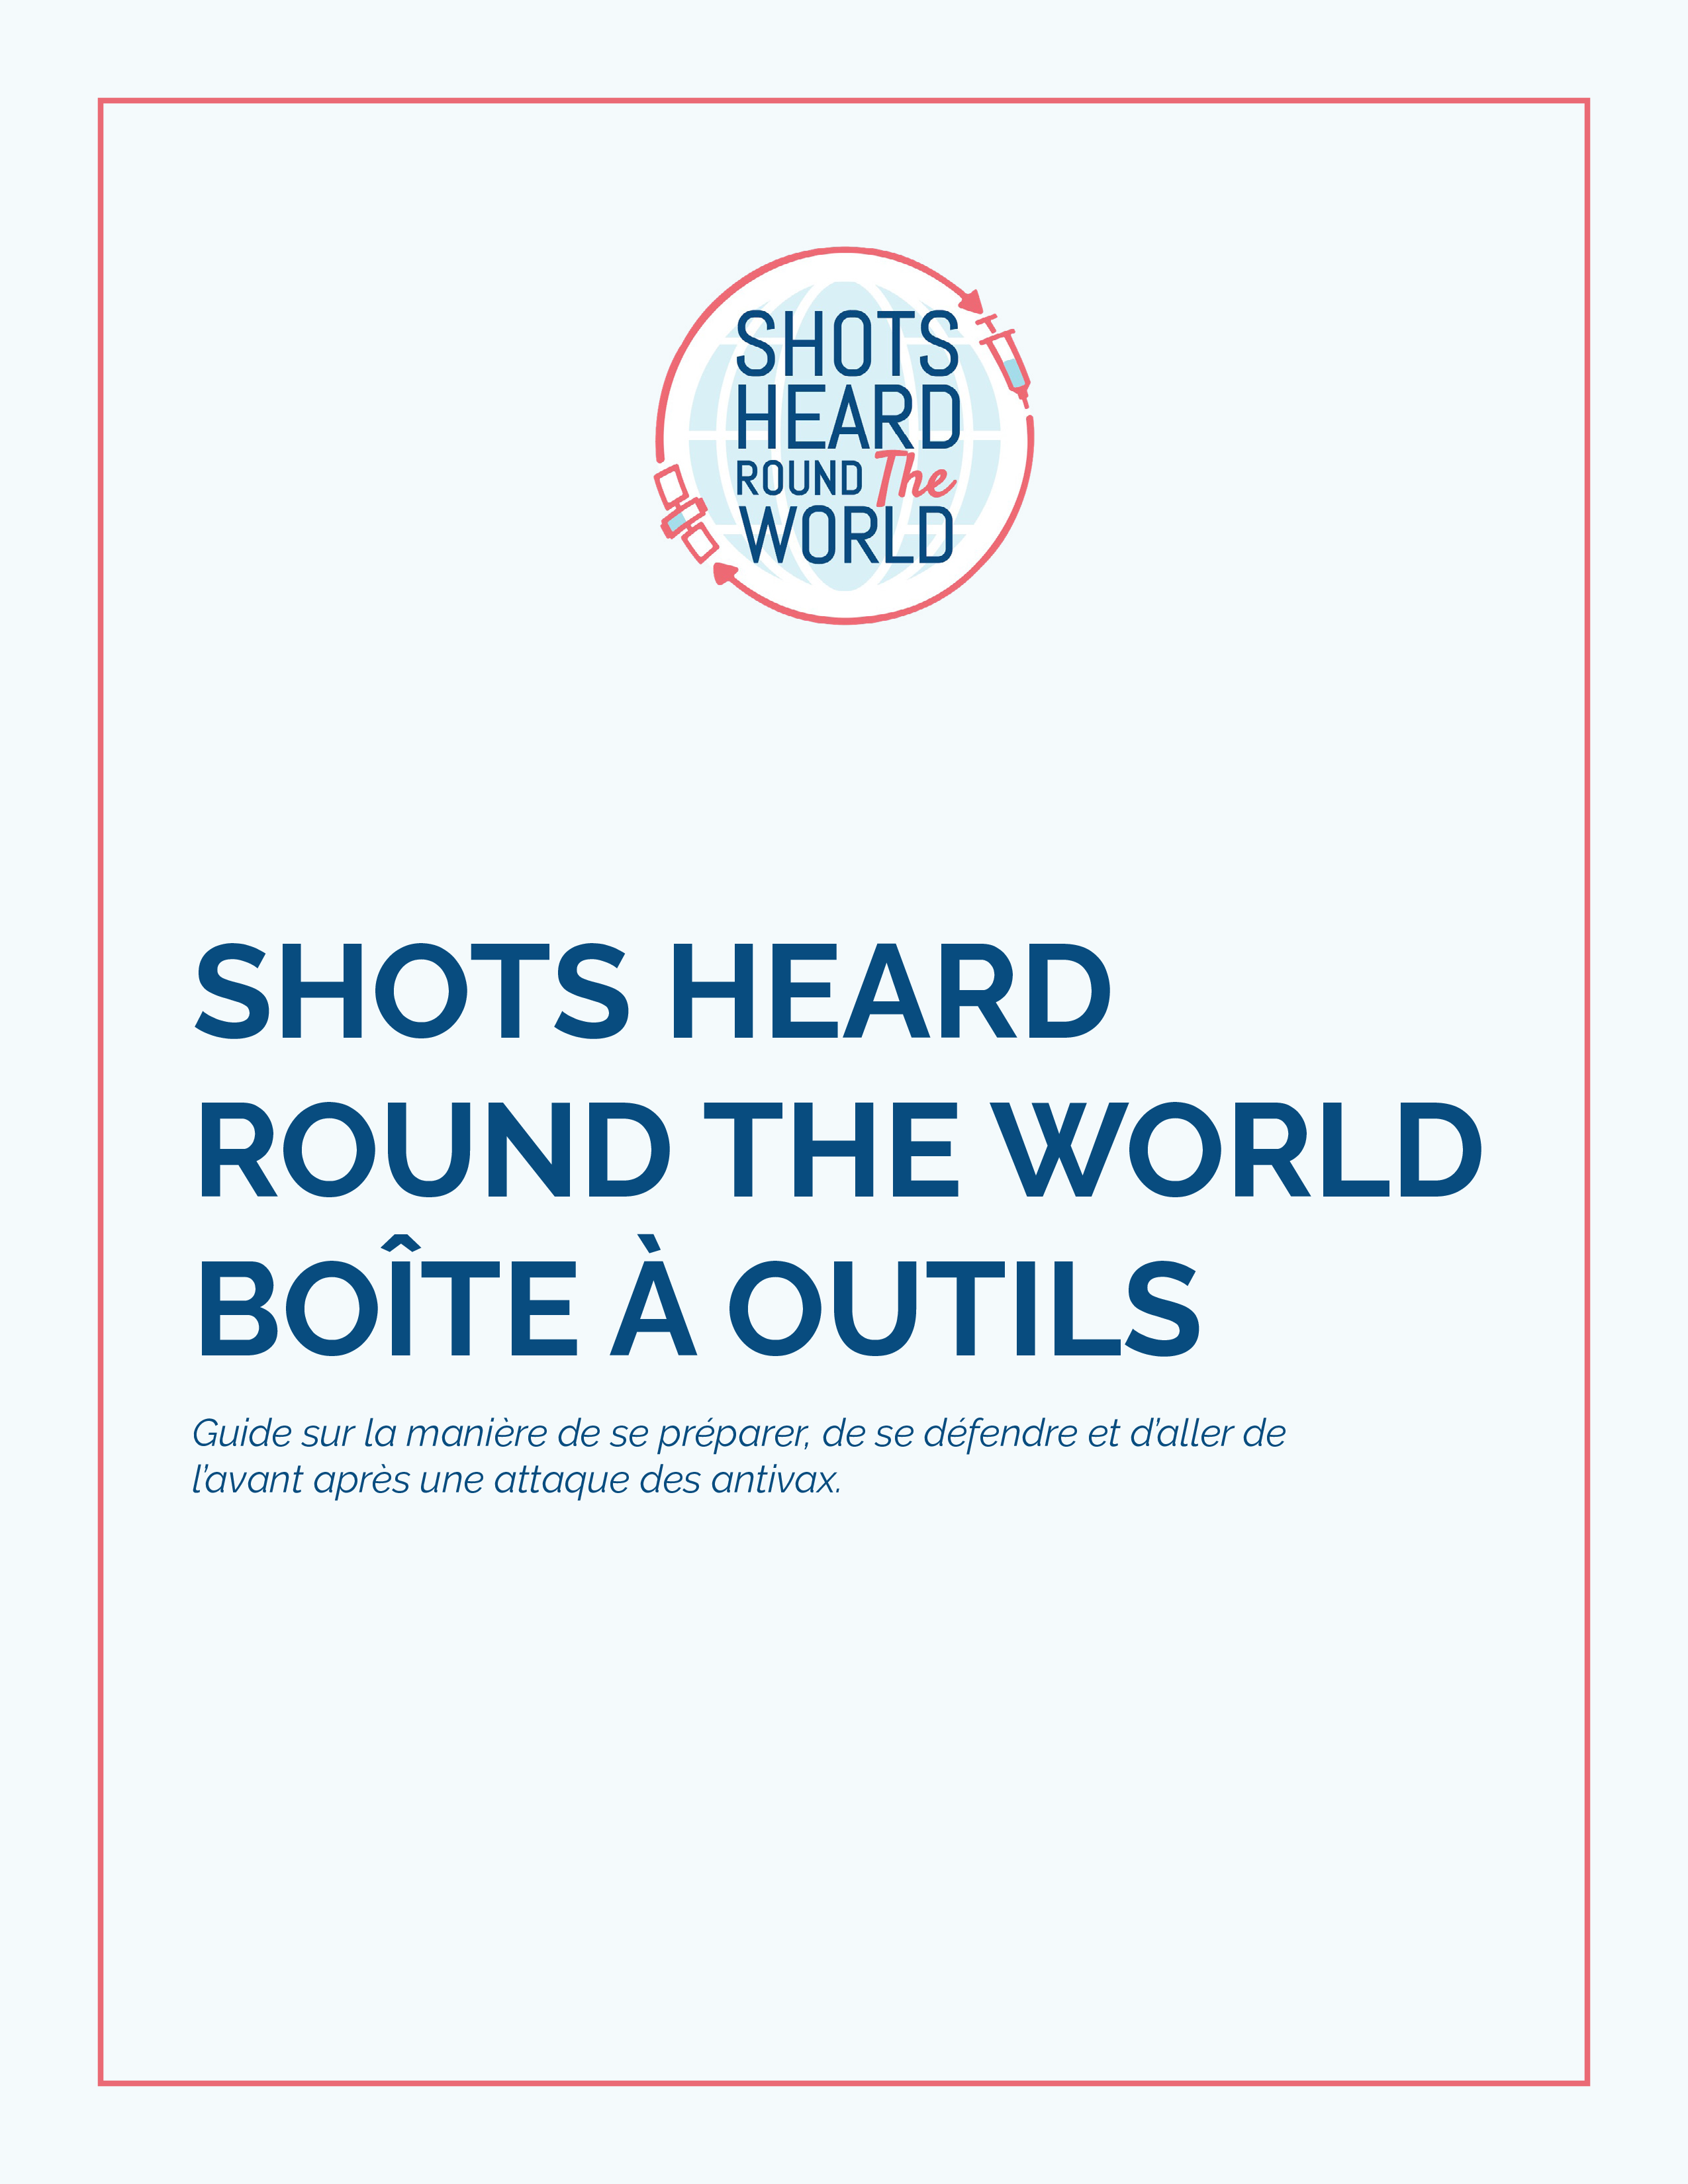 Cover page of Shots Heard Round the World Toolkit. States "Guidance on how to prepare for, defend against, and move forward after an anti-vaccination attack."